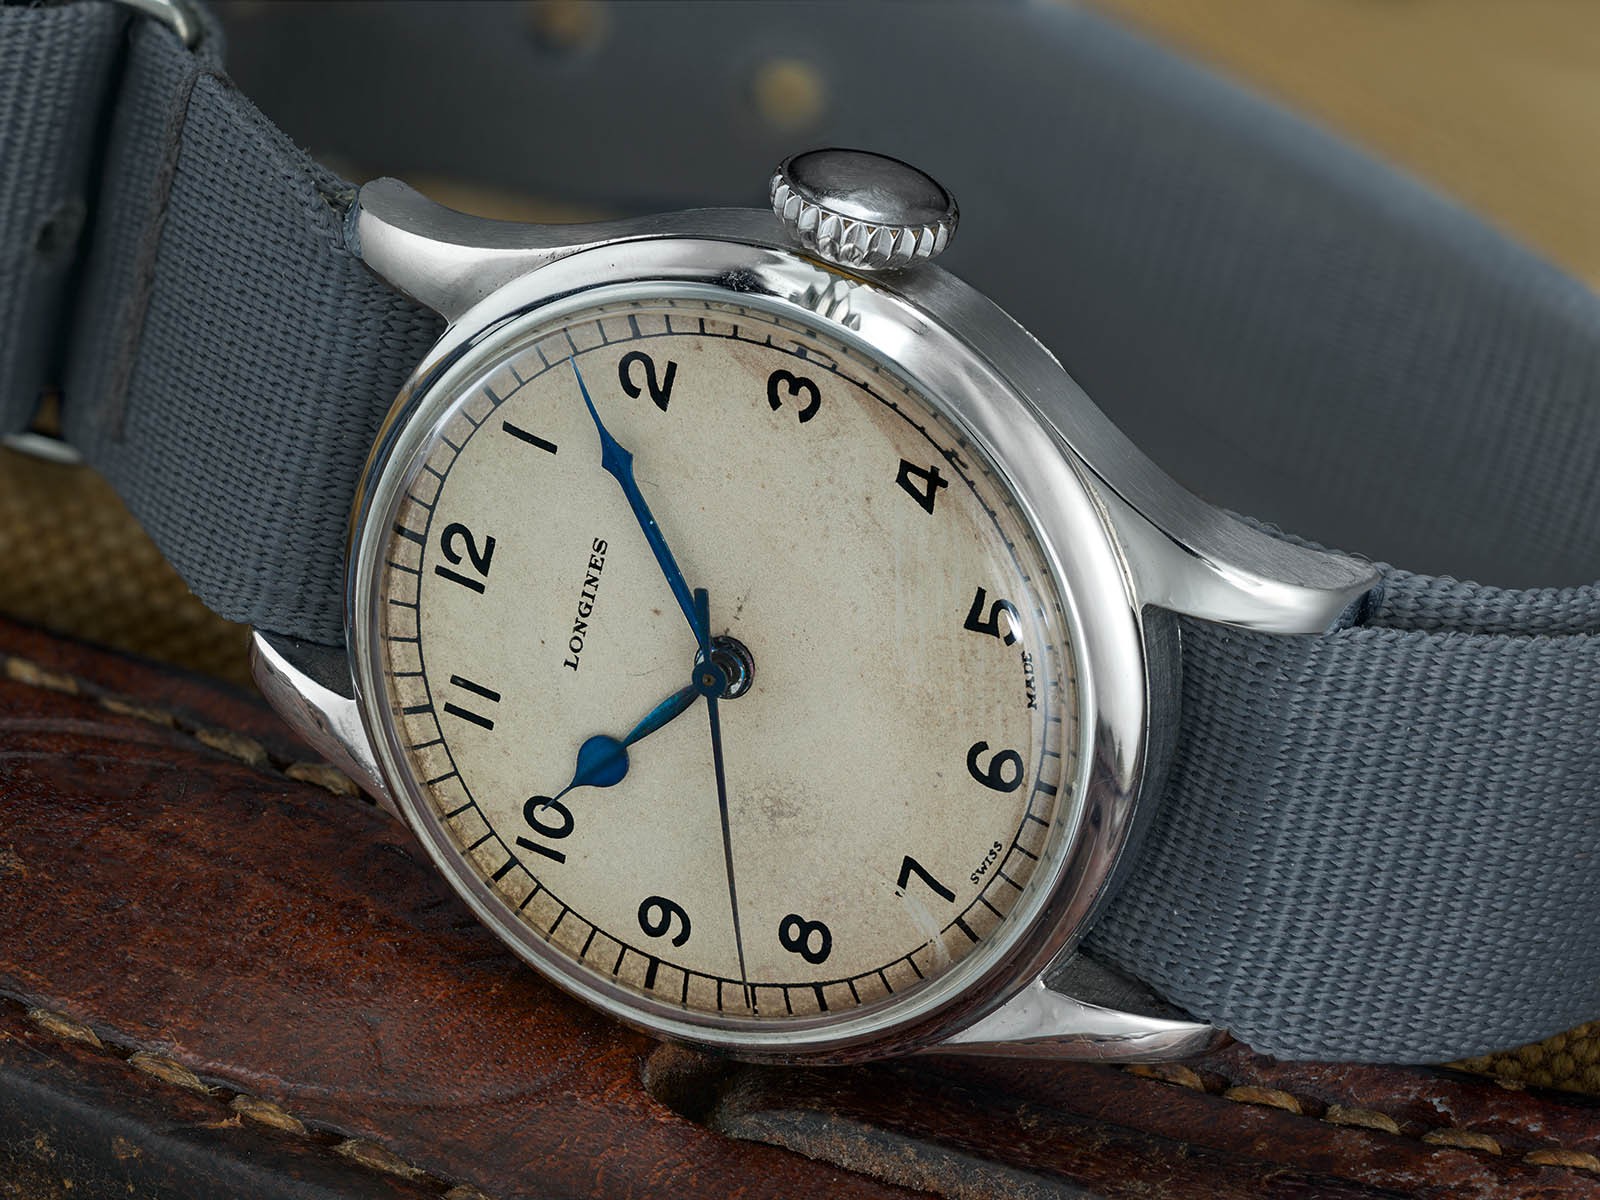 The new Longines looks very similar to the original model in 1940s.